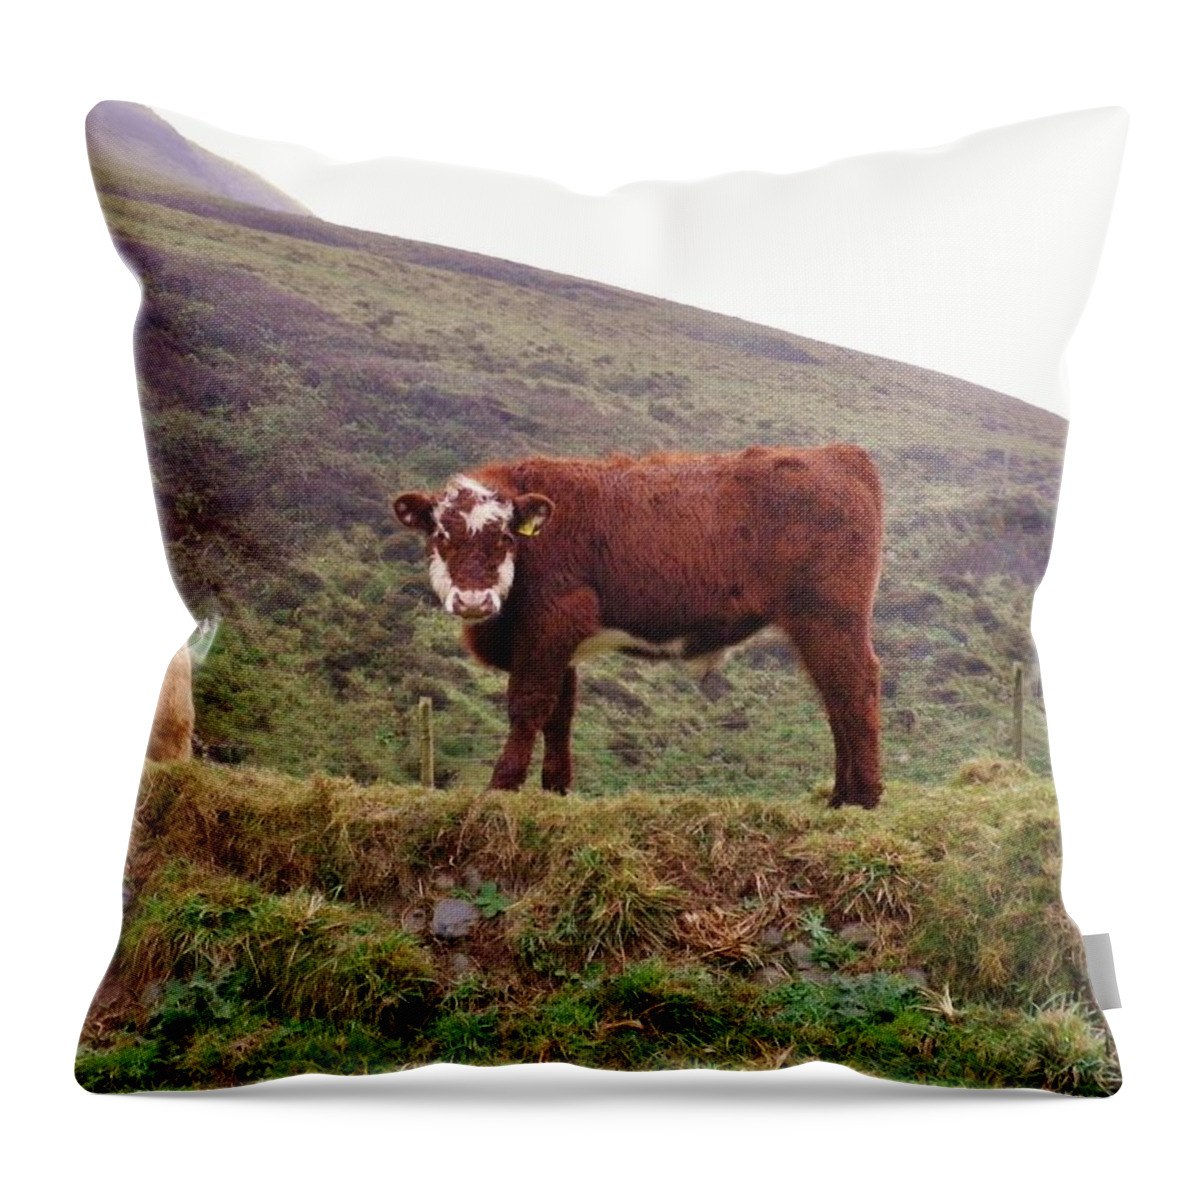 Cows Throw Pillow featuring the photograph That Feeling Of Being Watched by Richard Brookes